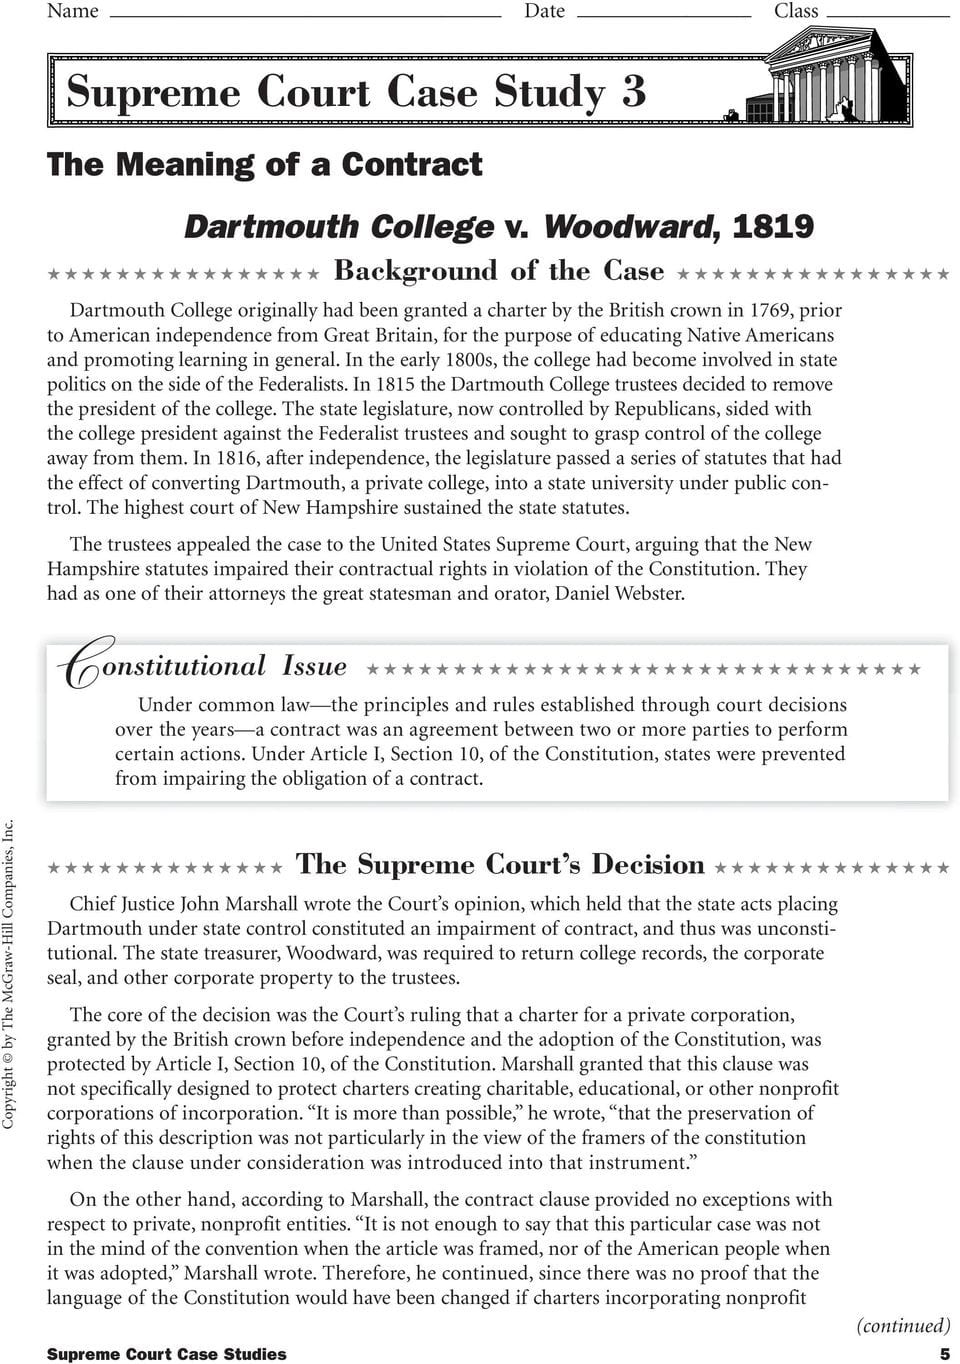 supreme-court-cases-worksheet-answers-yooob-db-excel